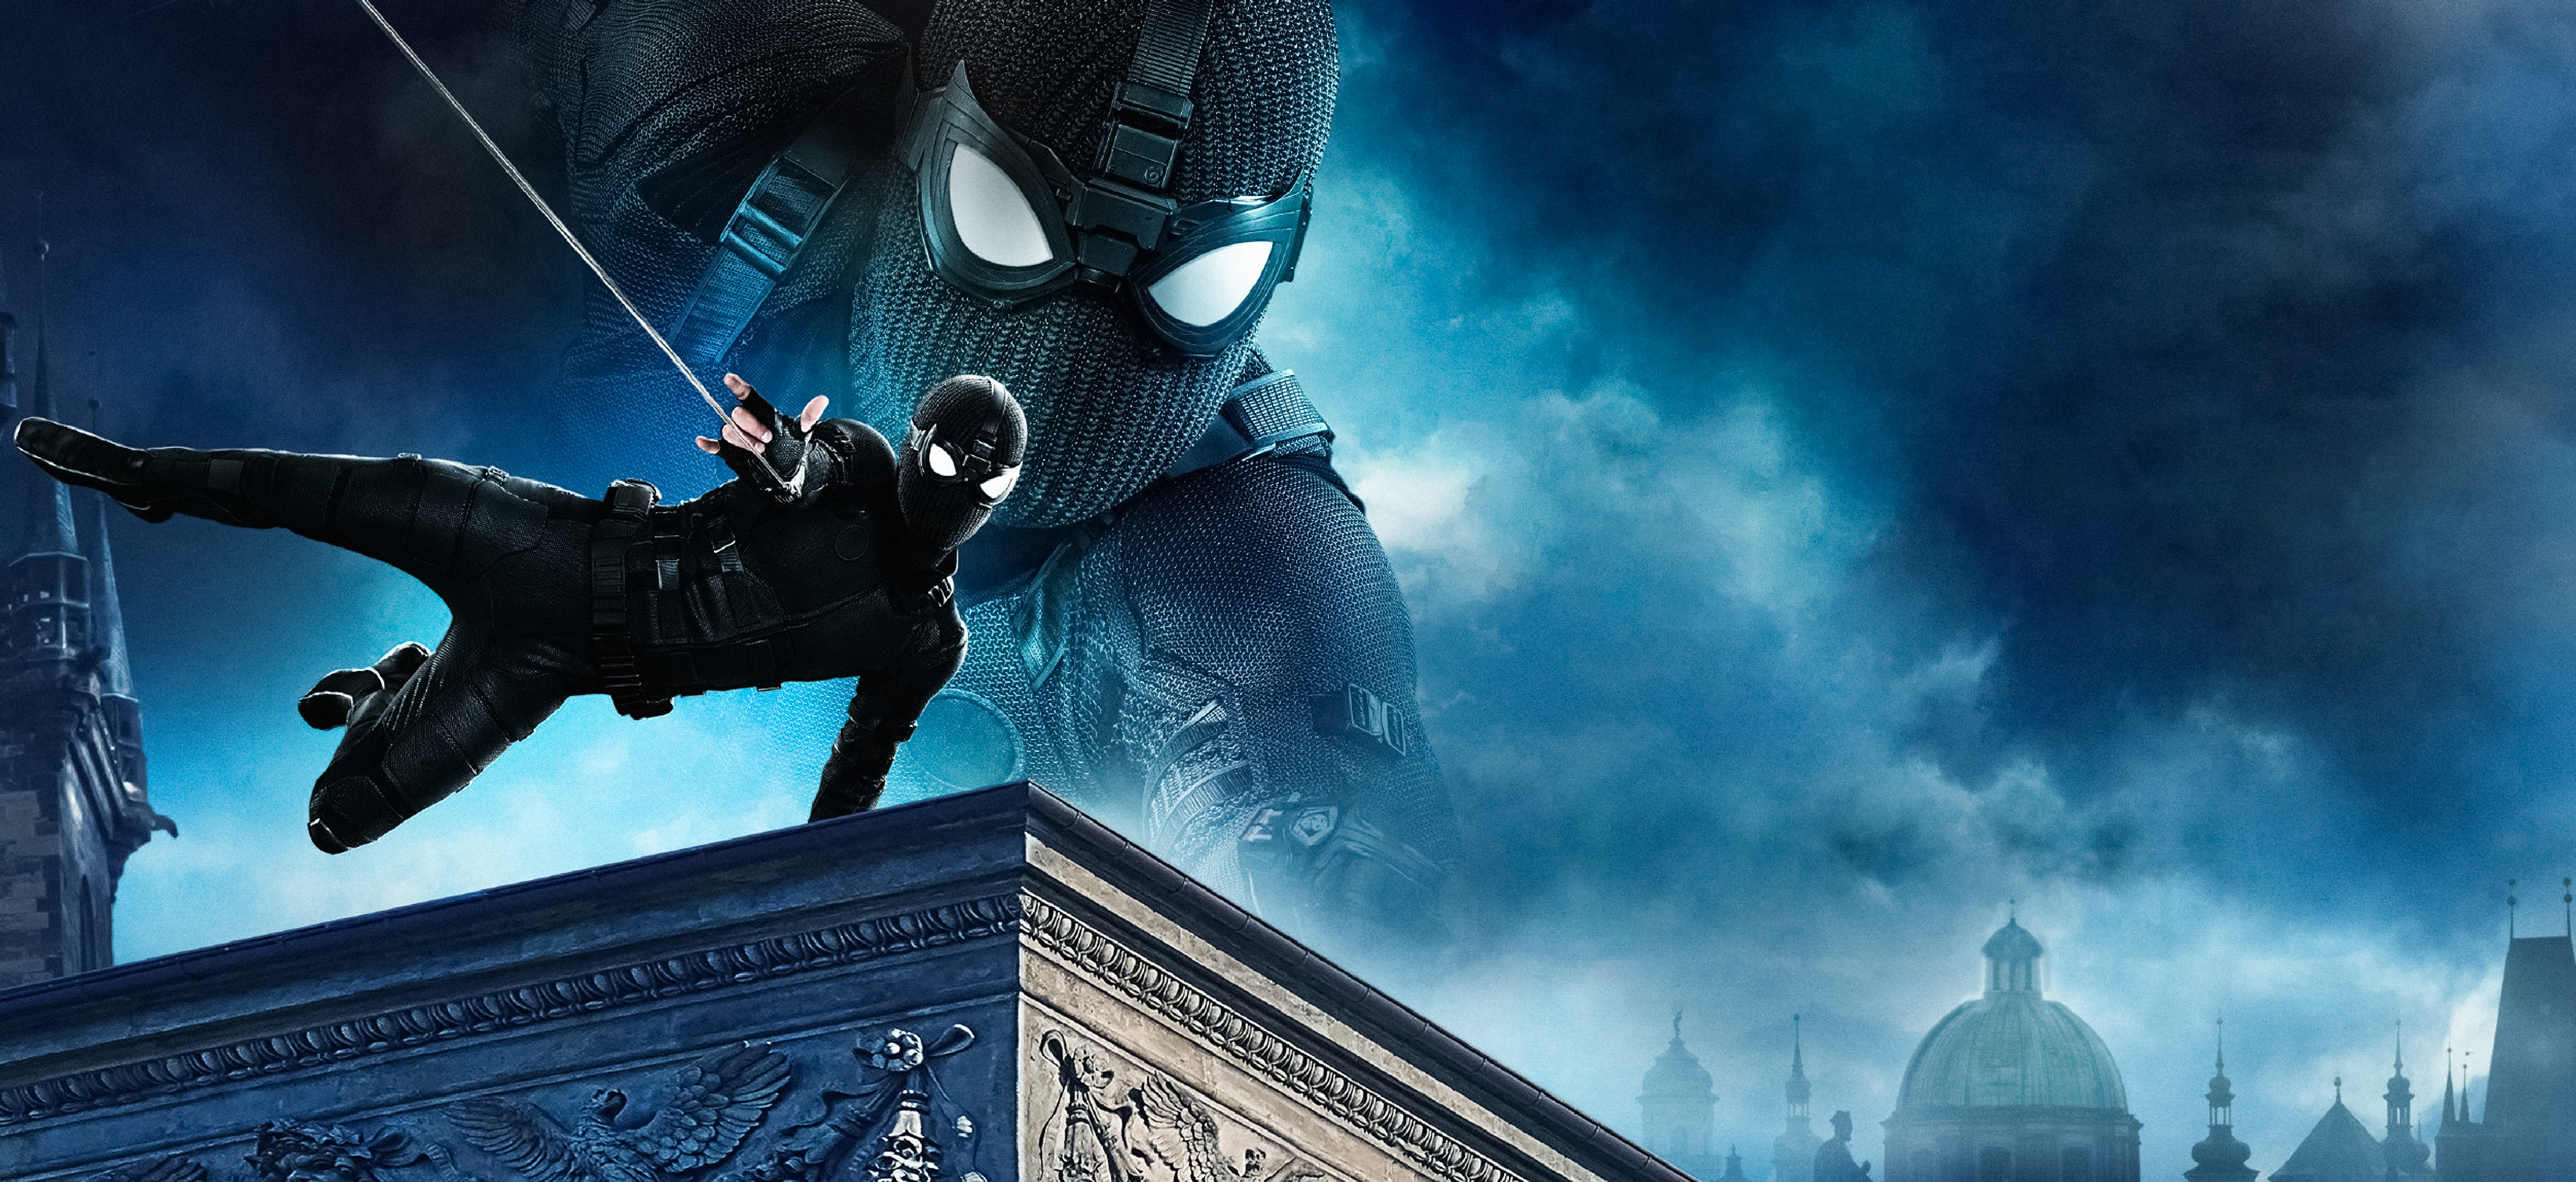 Spider-Man: Far From Home Wallpaper 4K, Night Monkey, Movies, #888